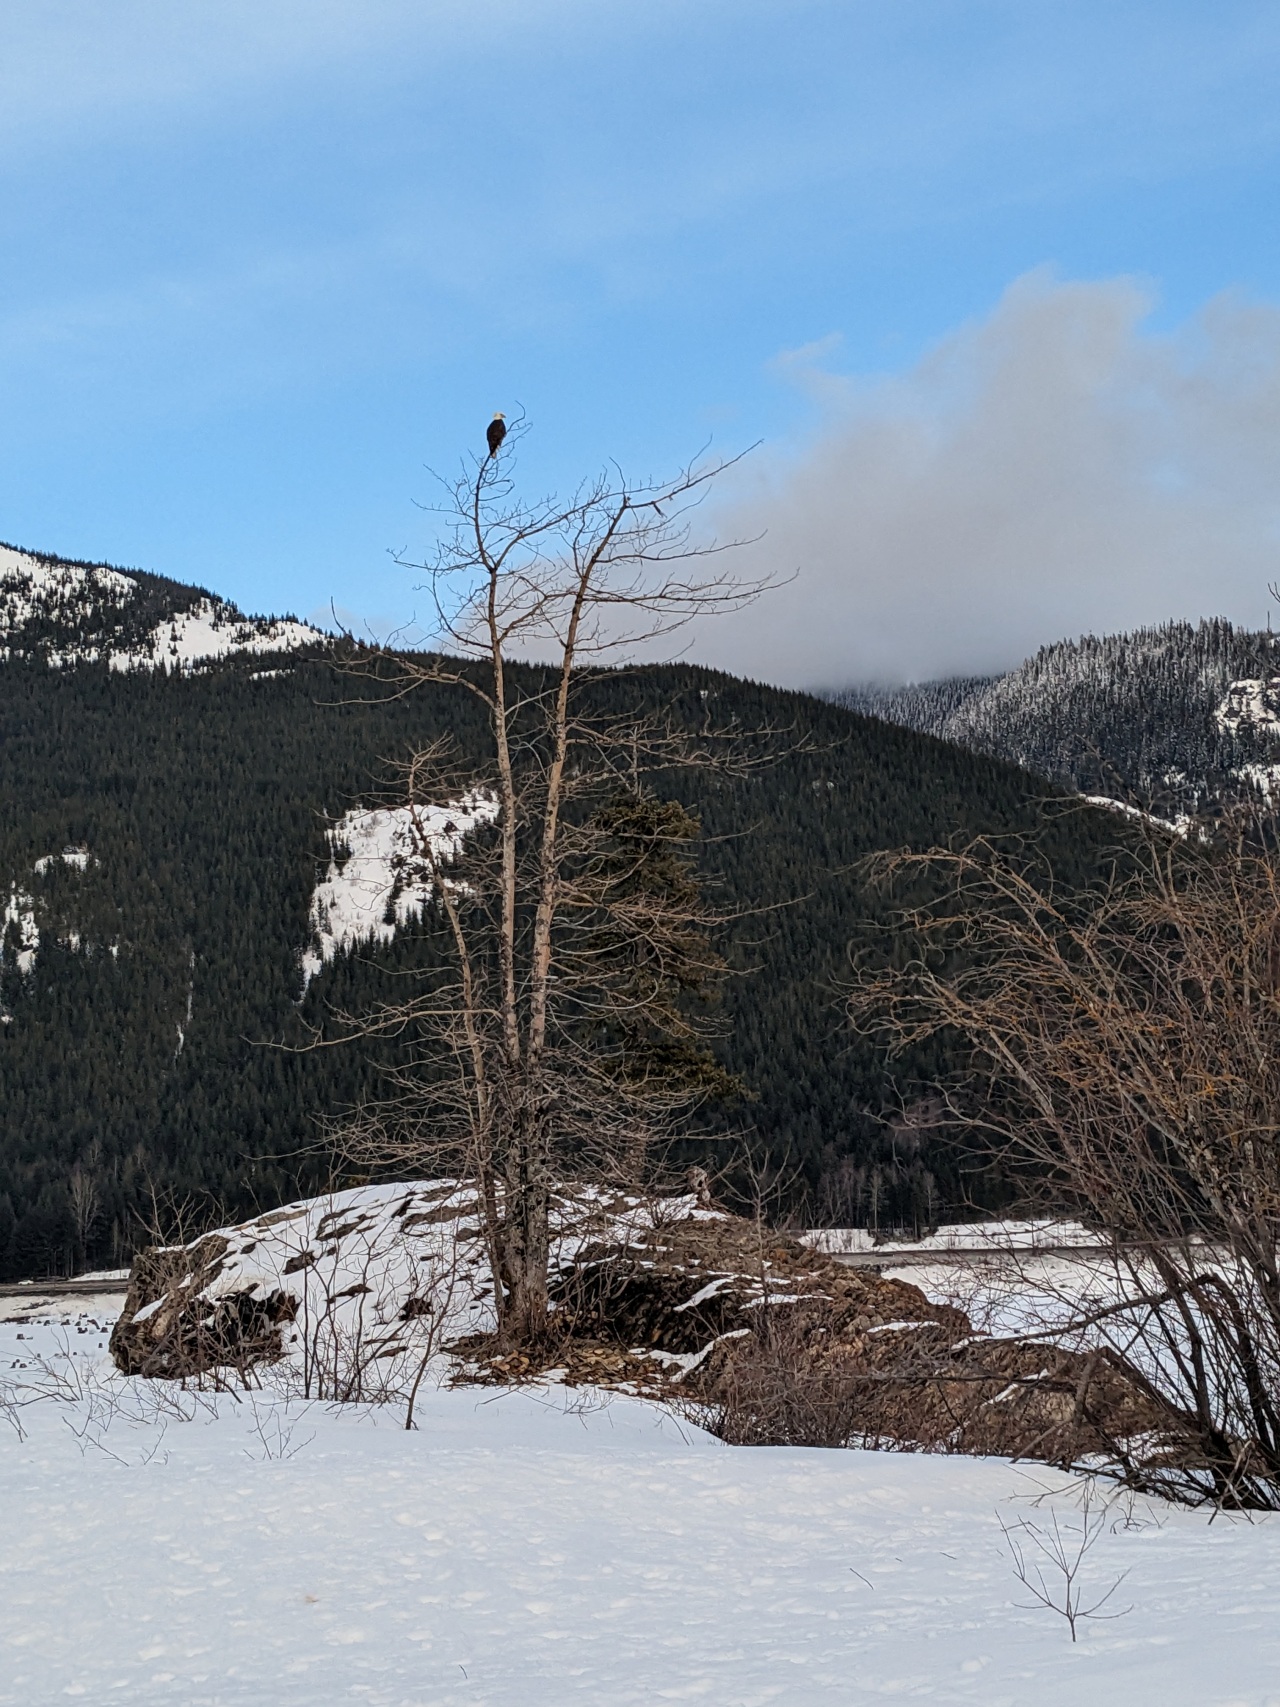 A bald eagle, but of course, I only had my phone on me while learning to snowshoe. Sure would stink if I didn't see another half dozen or so of them at different times in the month.